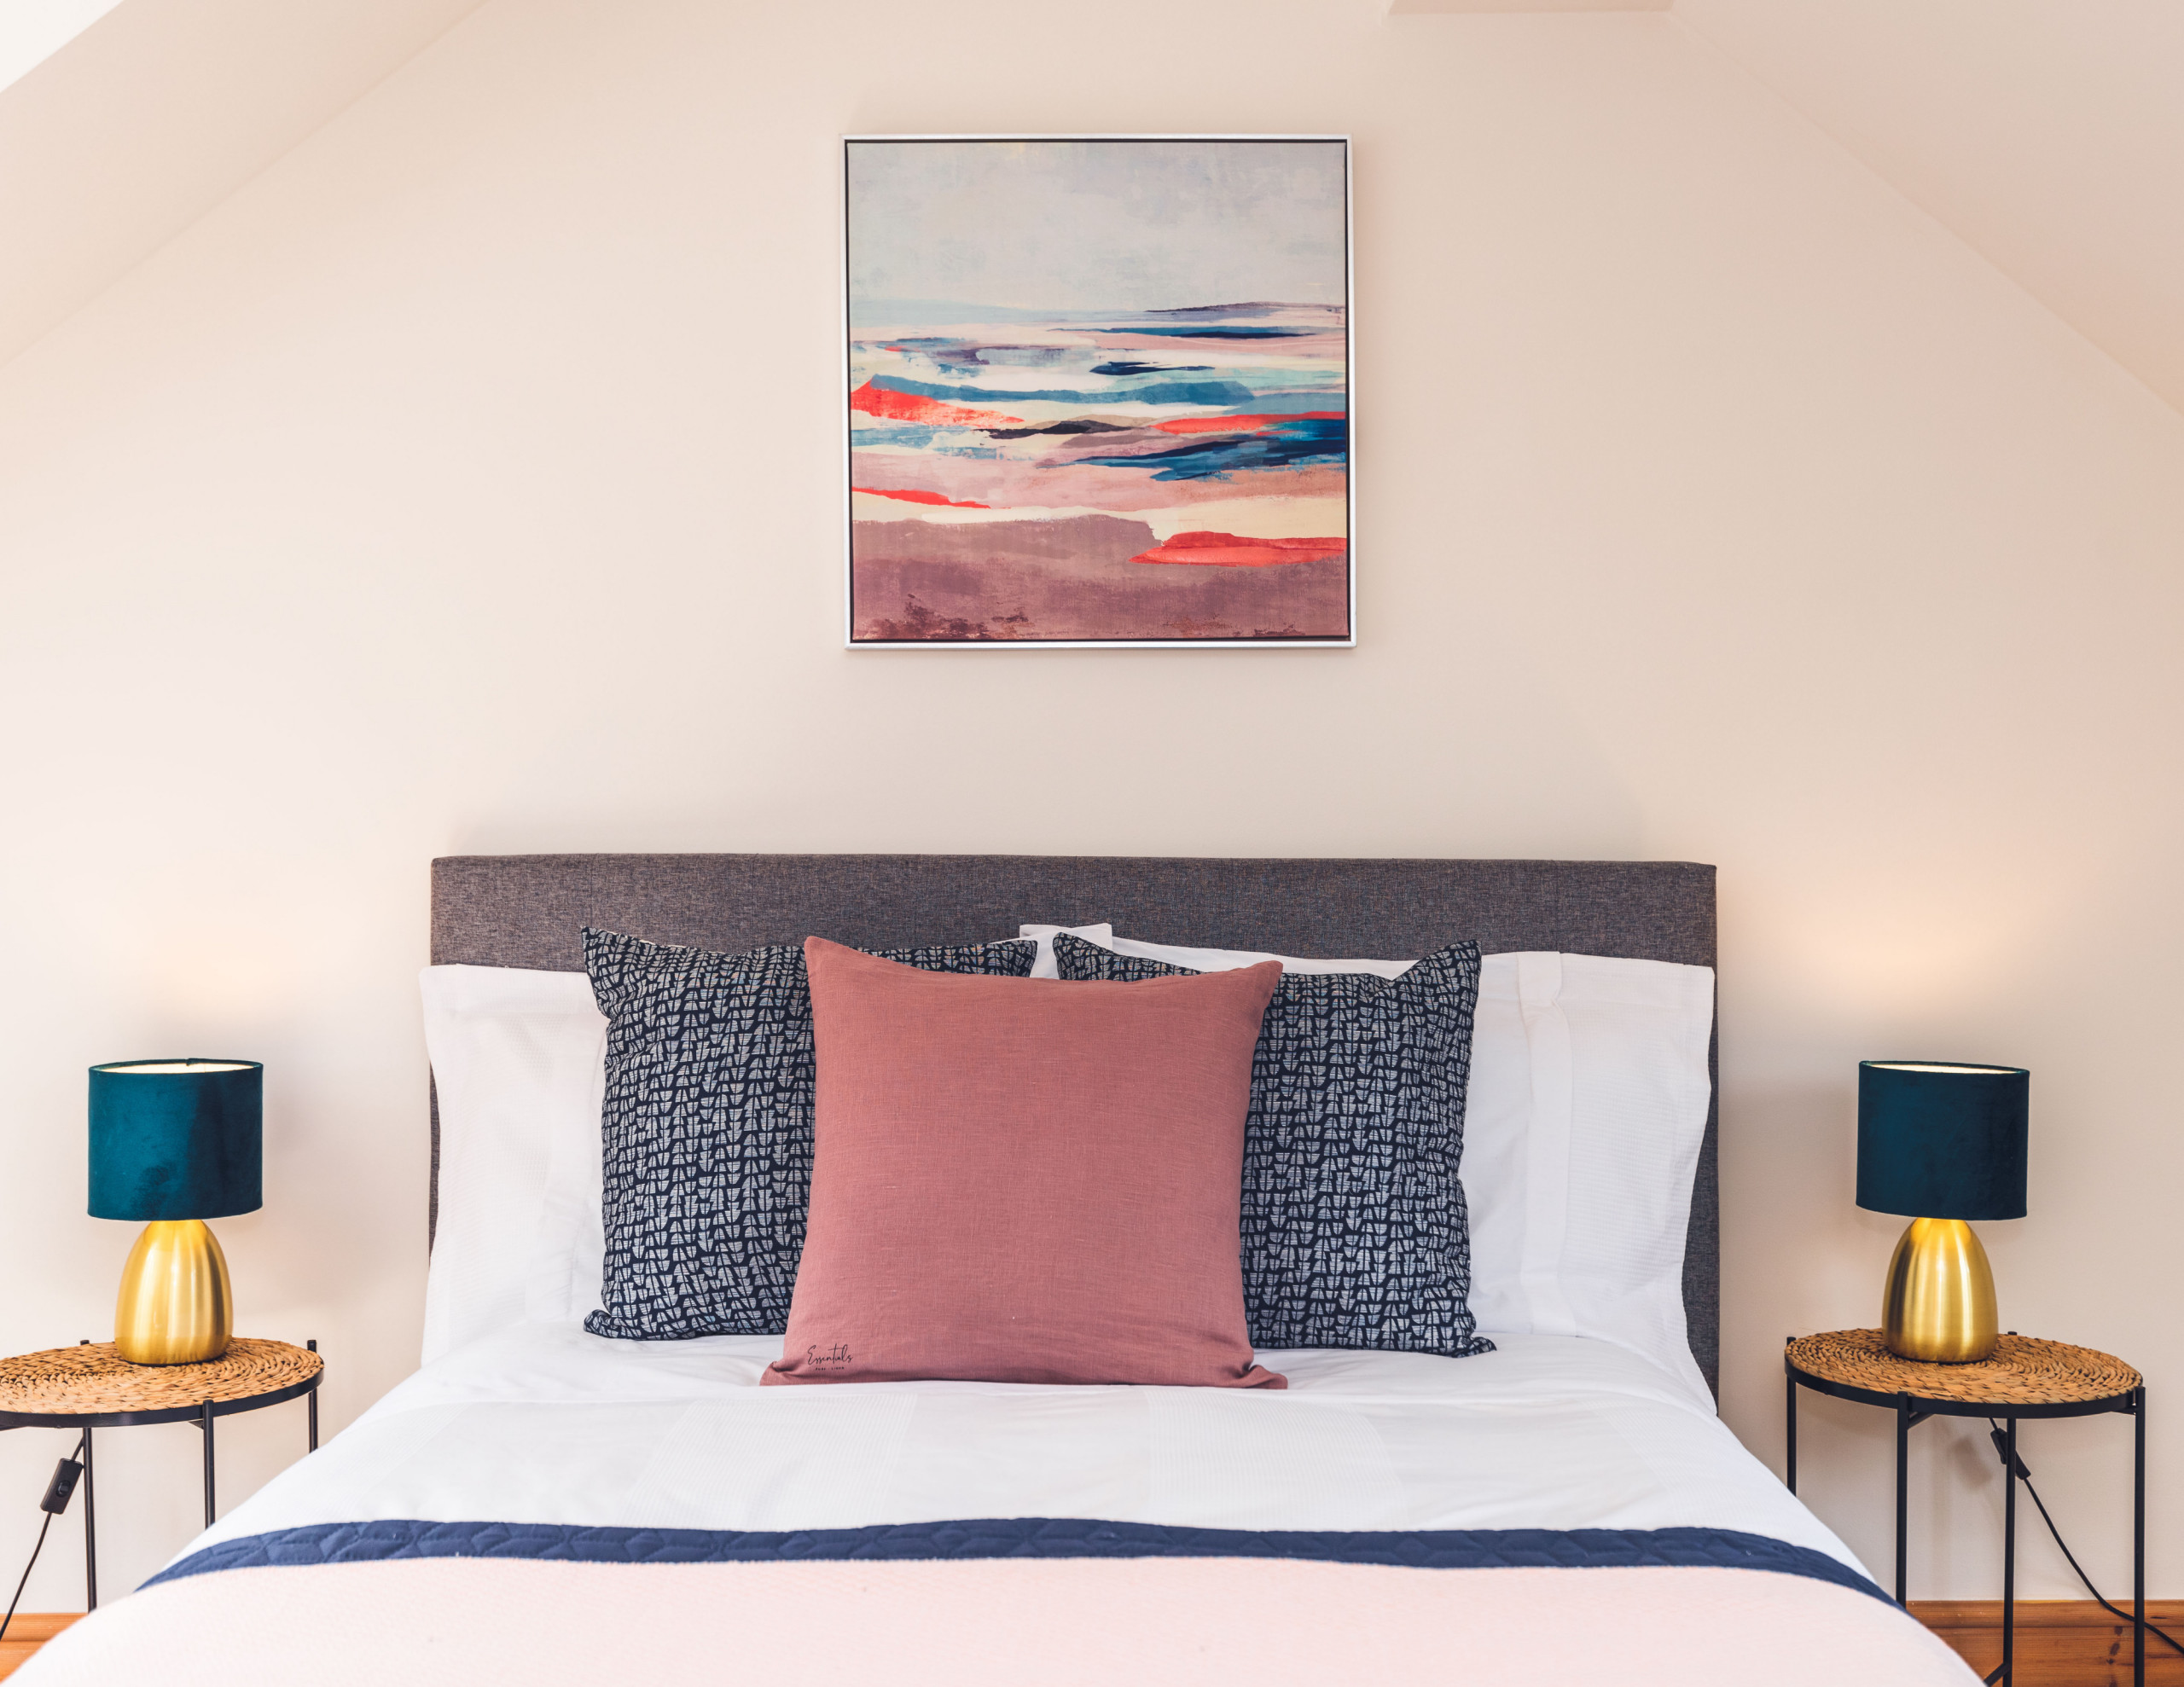 The large 4 bedroom in Derbyshire house was empty and some of the restricted height bedrooms seemed very small so they really saw the investment staging could bring when presenting the property for sa